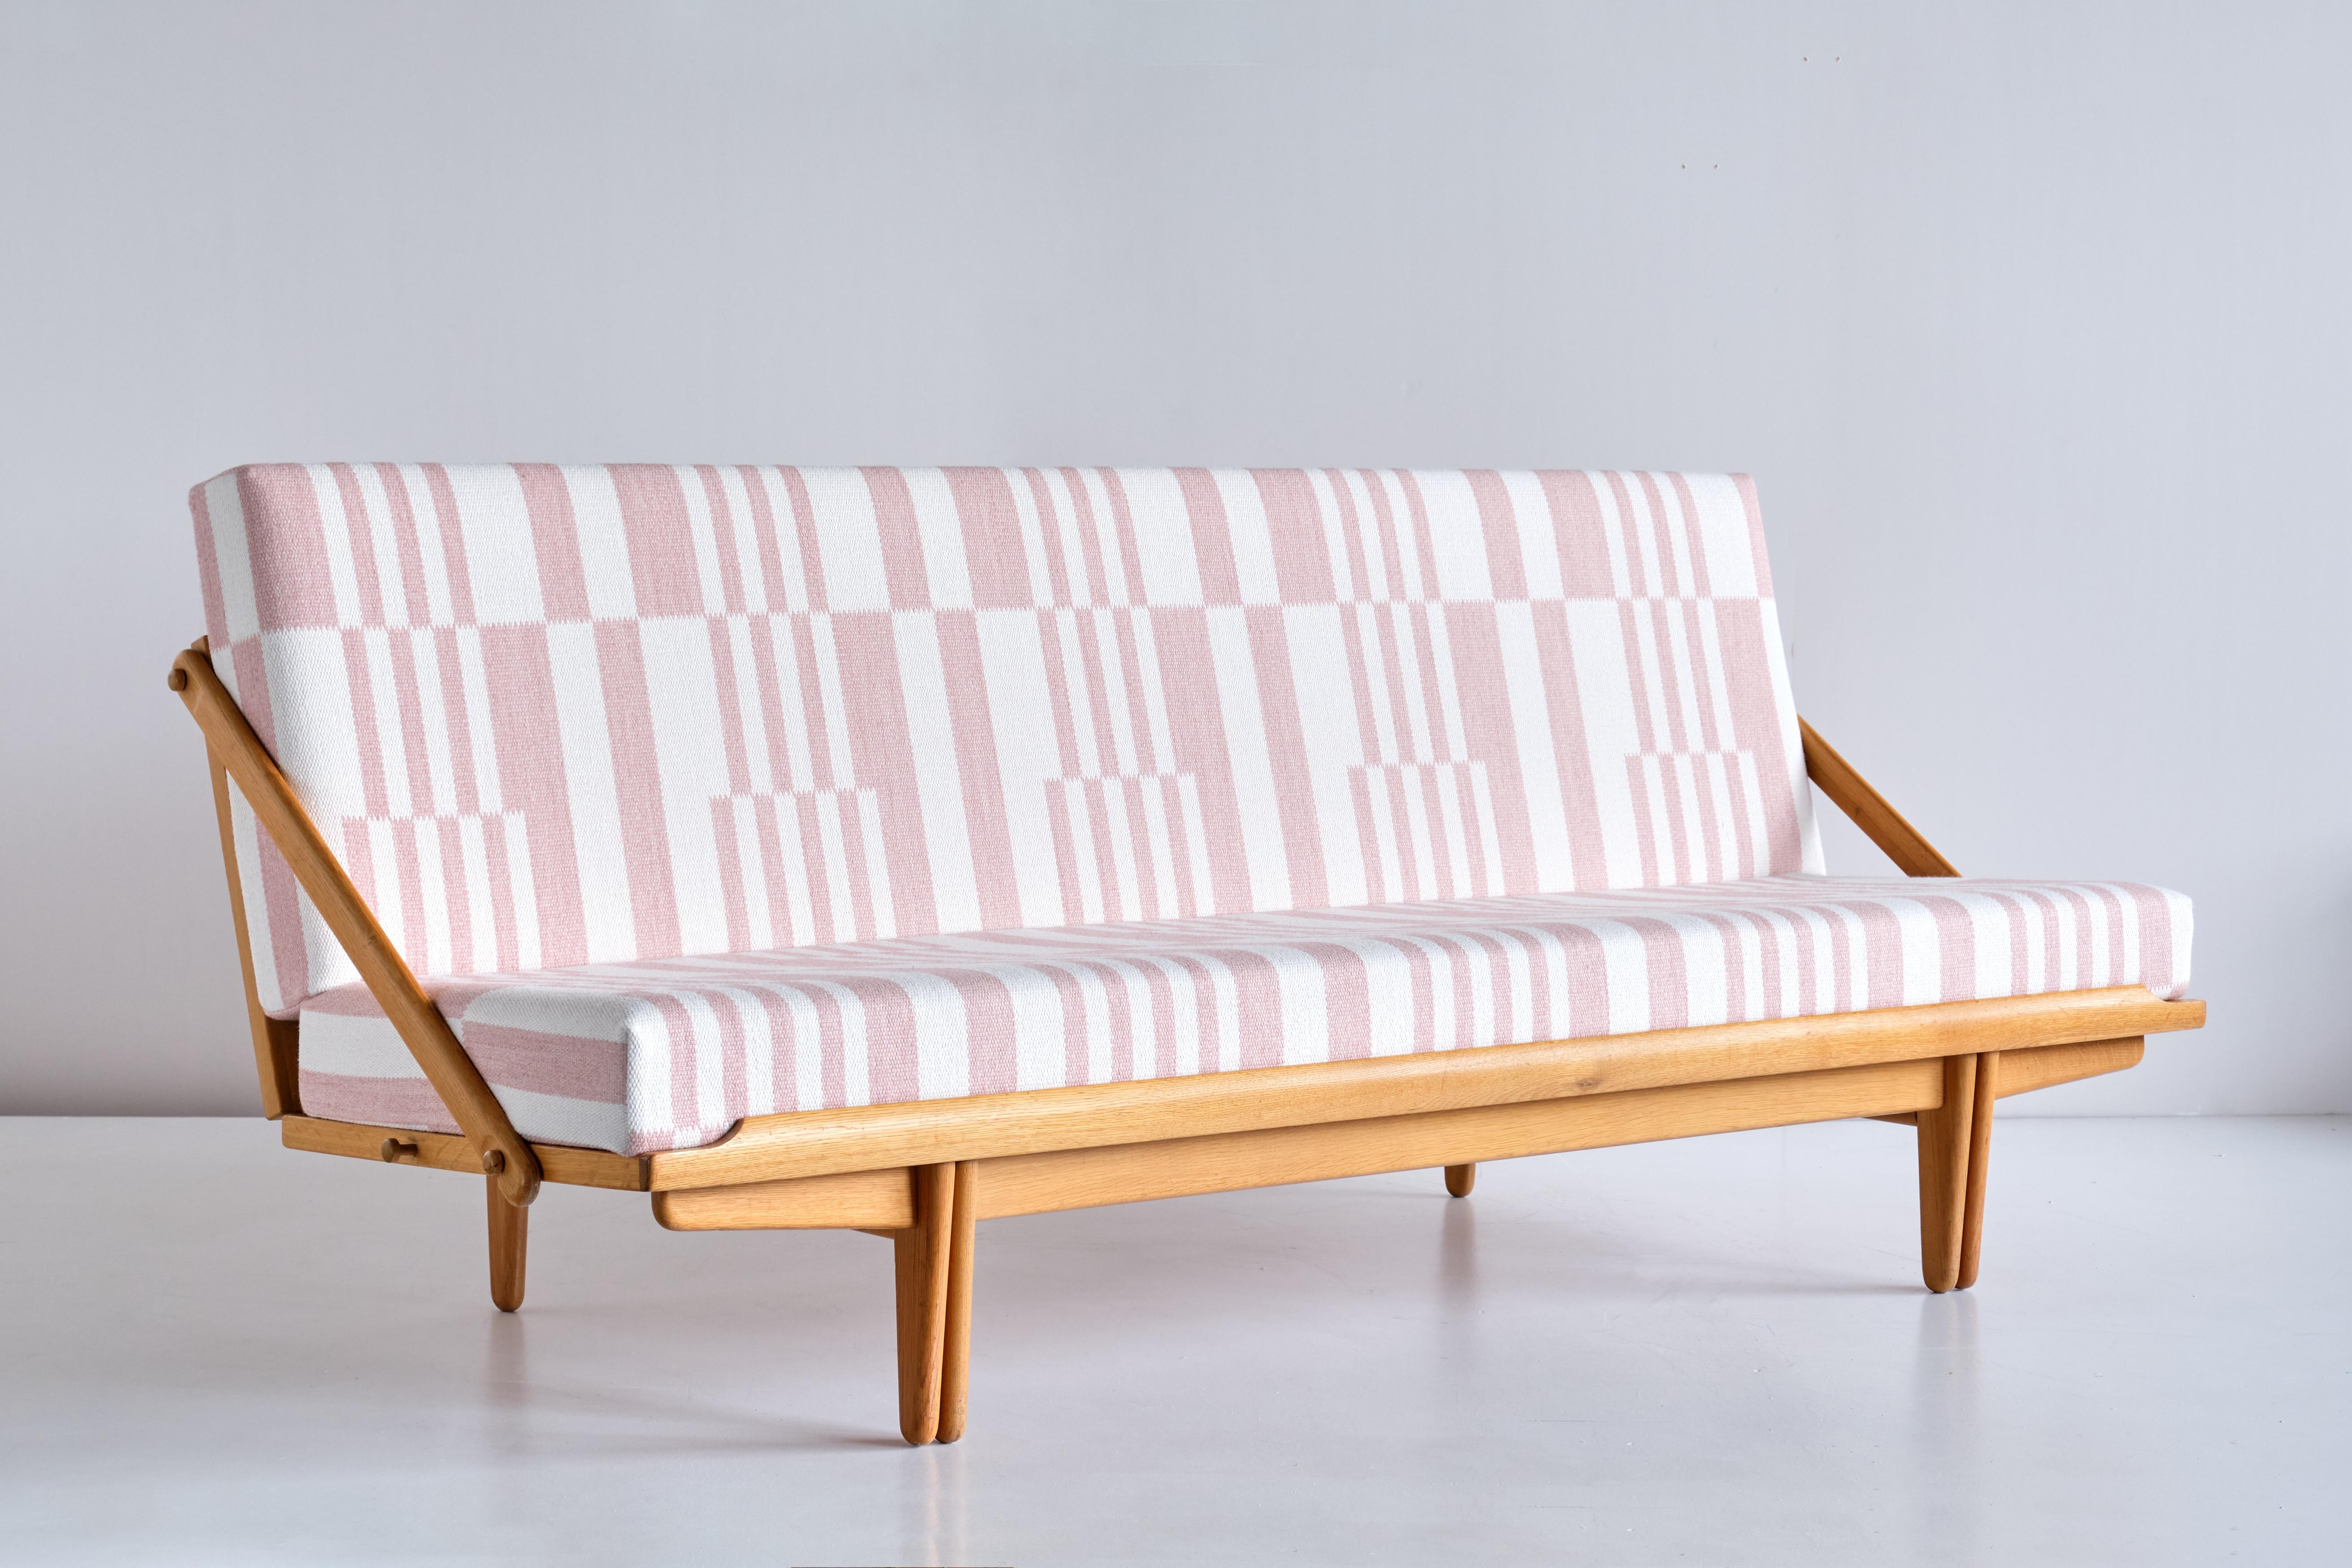 This rare daybed / sofa was designed by Poul Volther and produced by Gemla Fabrikers AB in Sweden, 1955. This particular model was named Diva and numbered 981. The base is in solid oak wood and can be folded down to create a (day)bed. The cushions